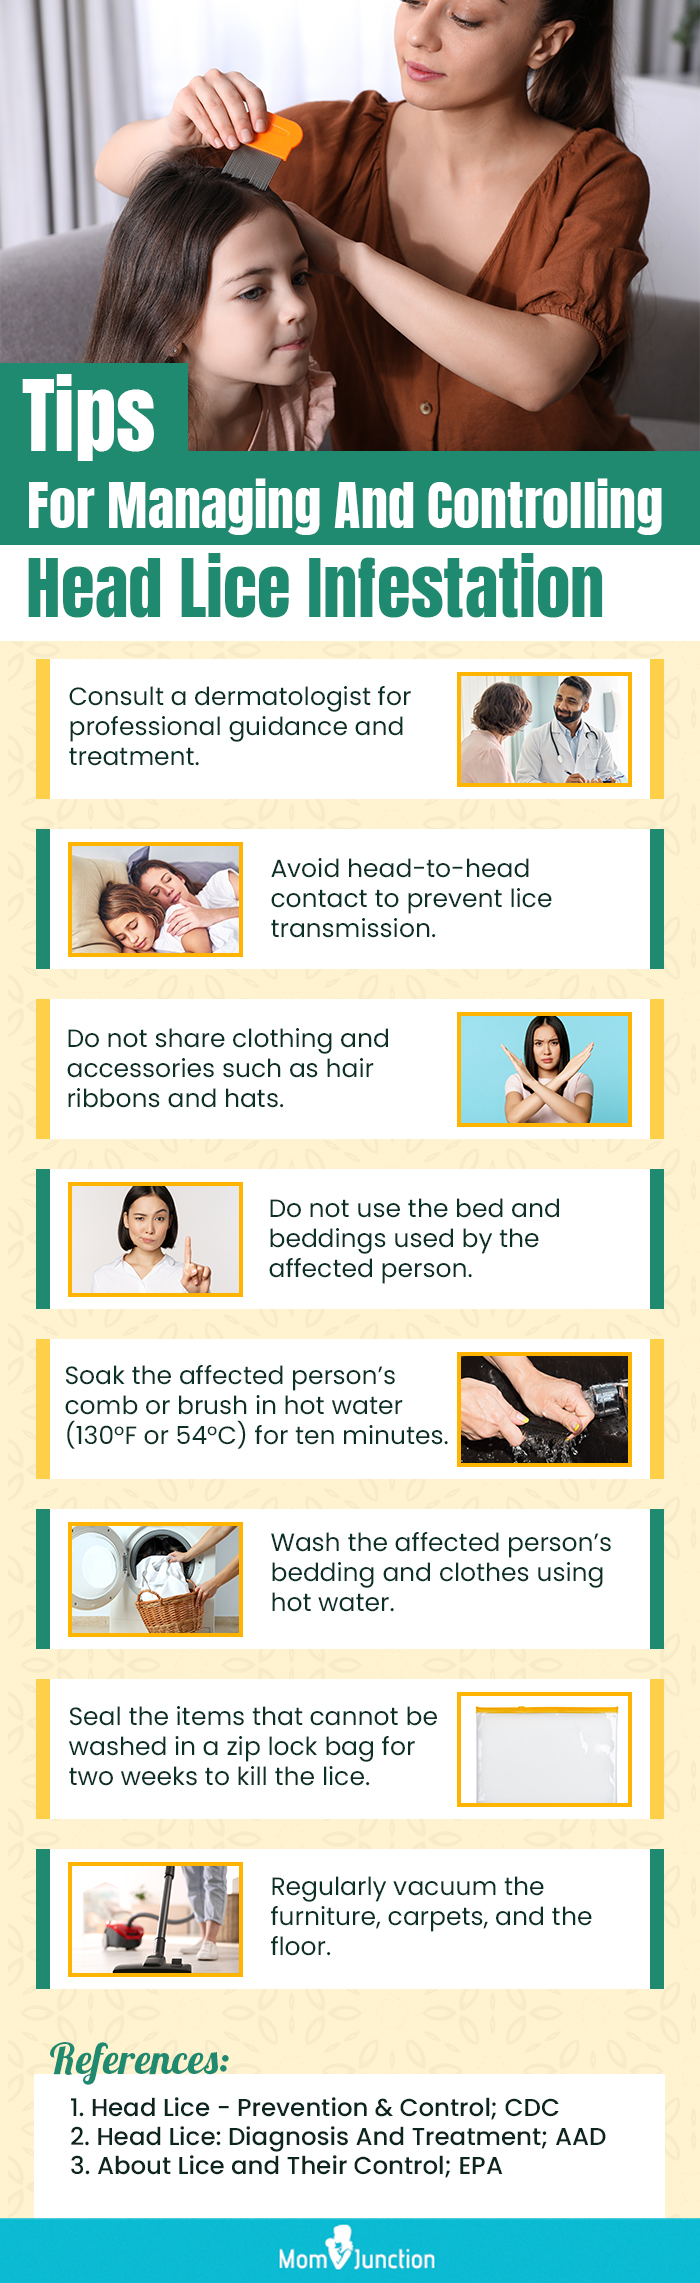 Tips For Managing And Controlling Head Lice Infestation (infographic)